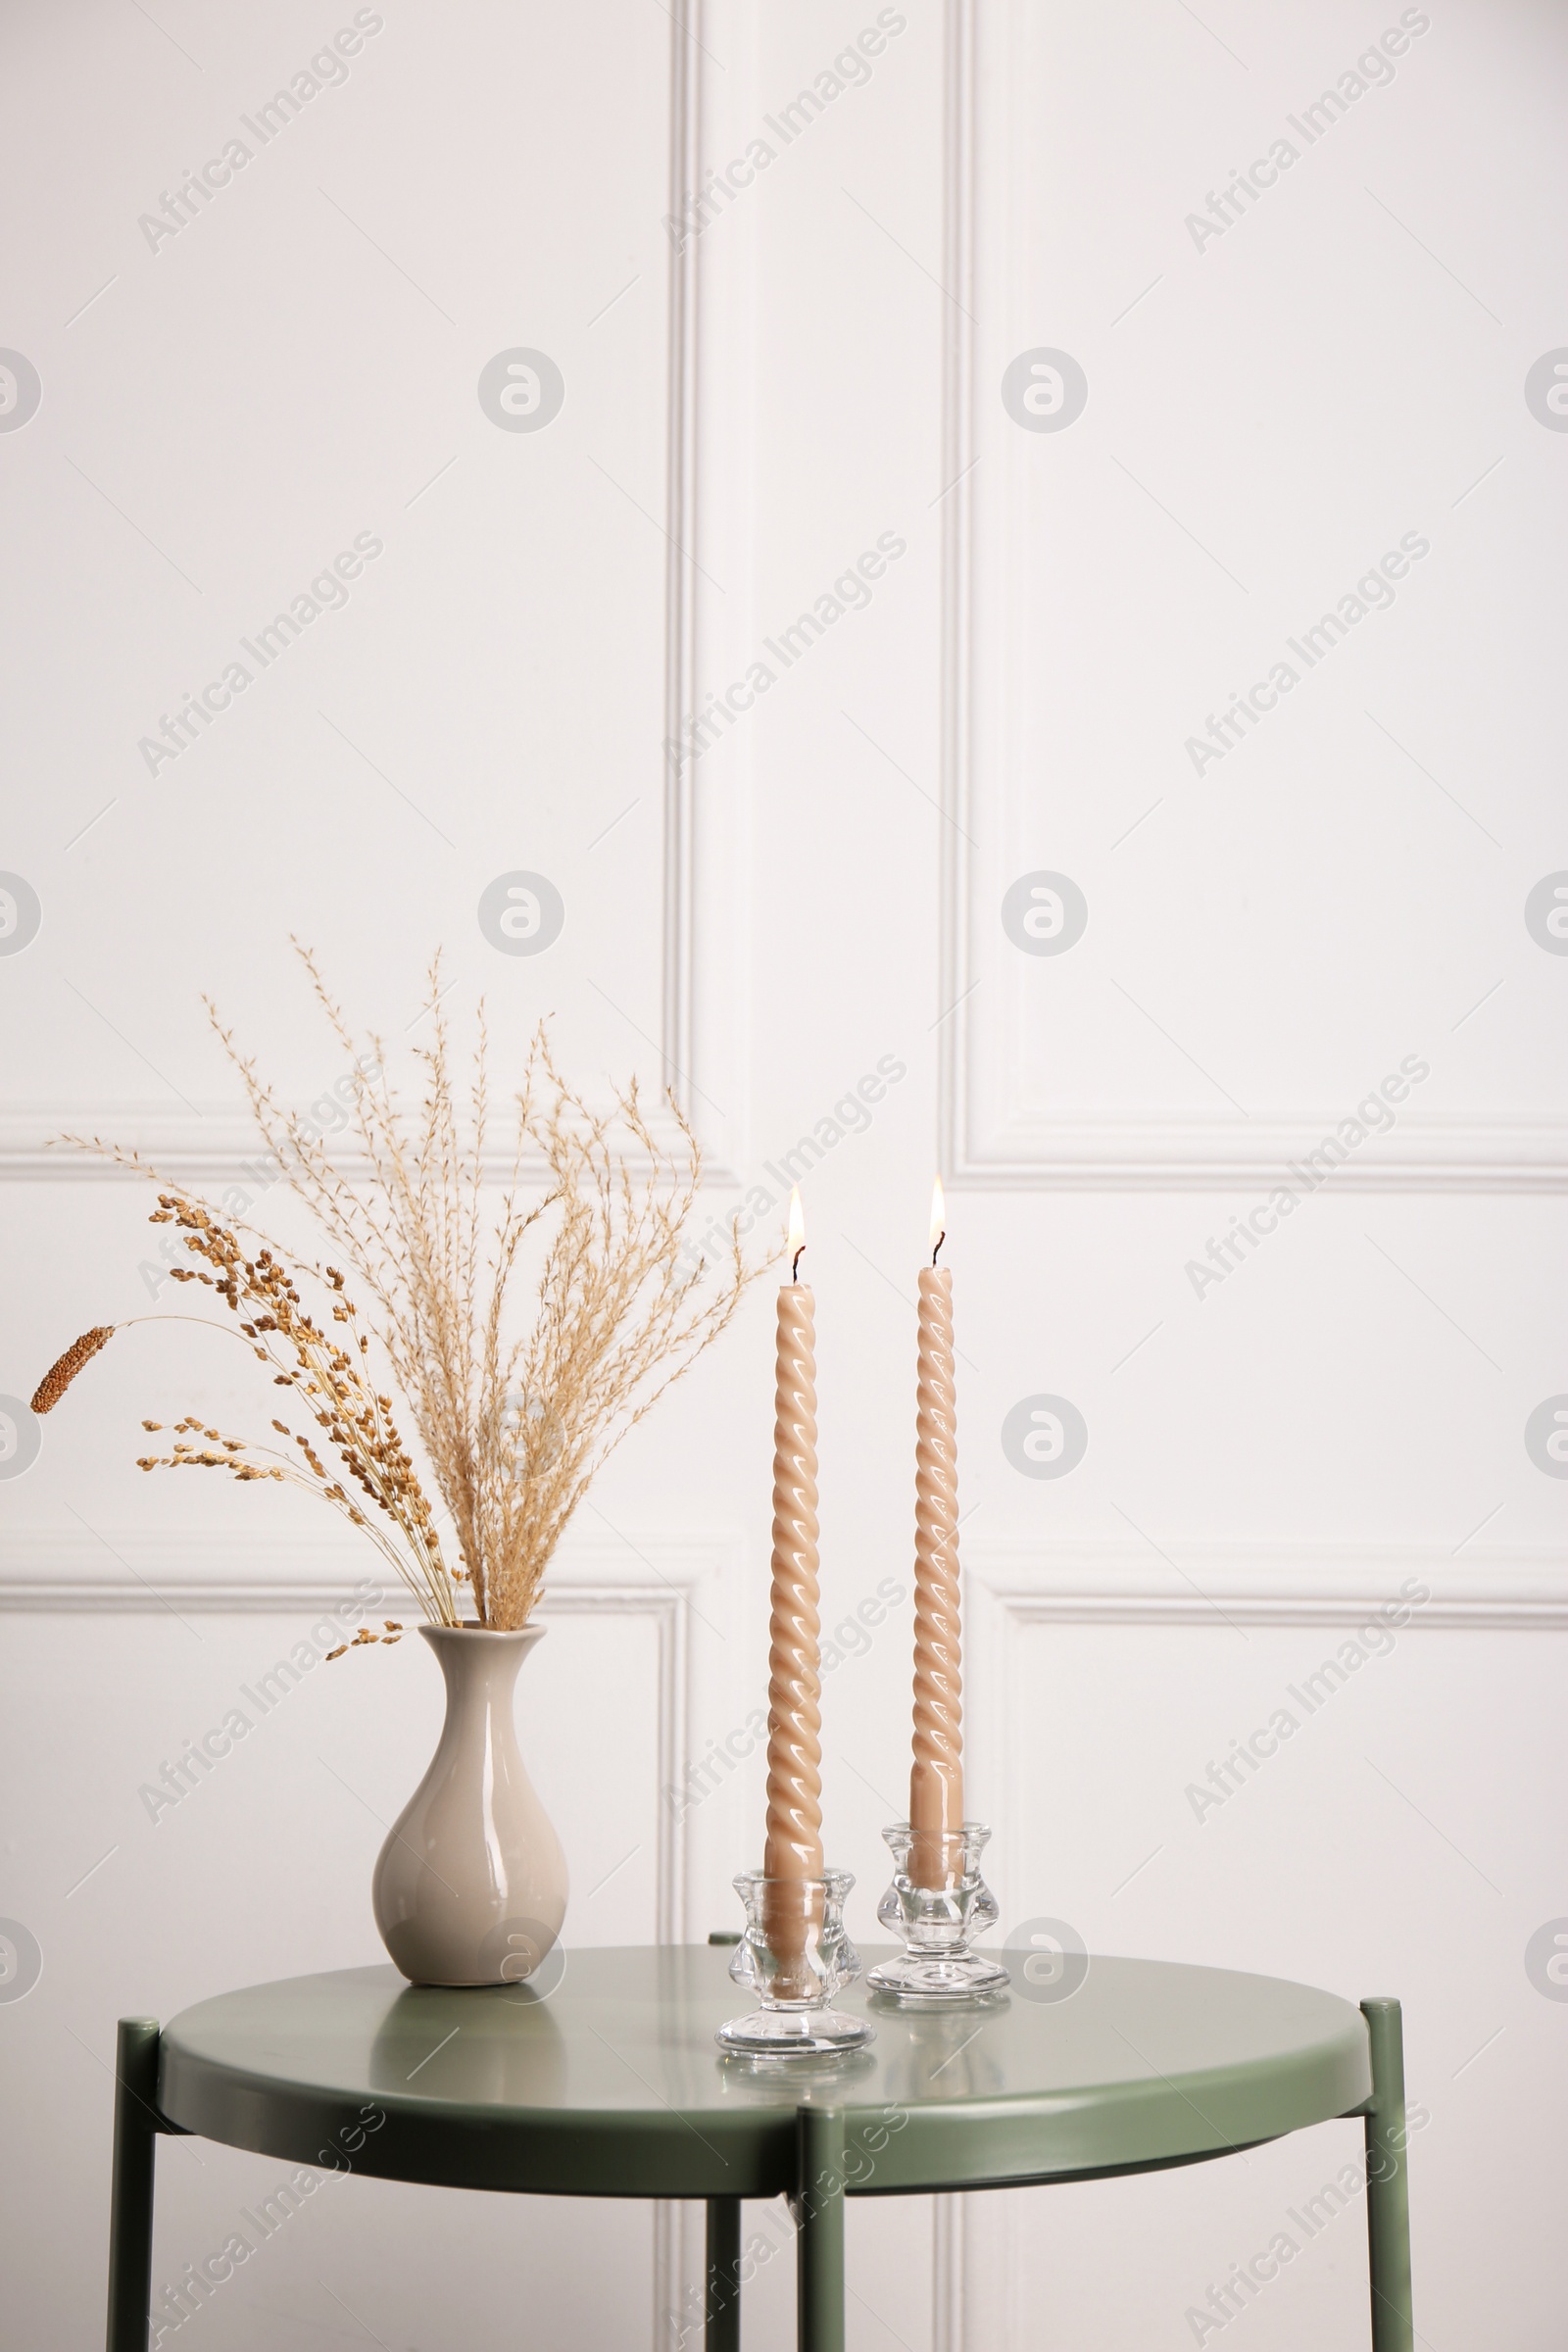 Photo of Dry plants in vase and burning candles on table near white wall